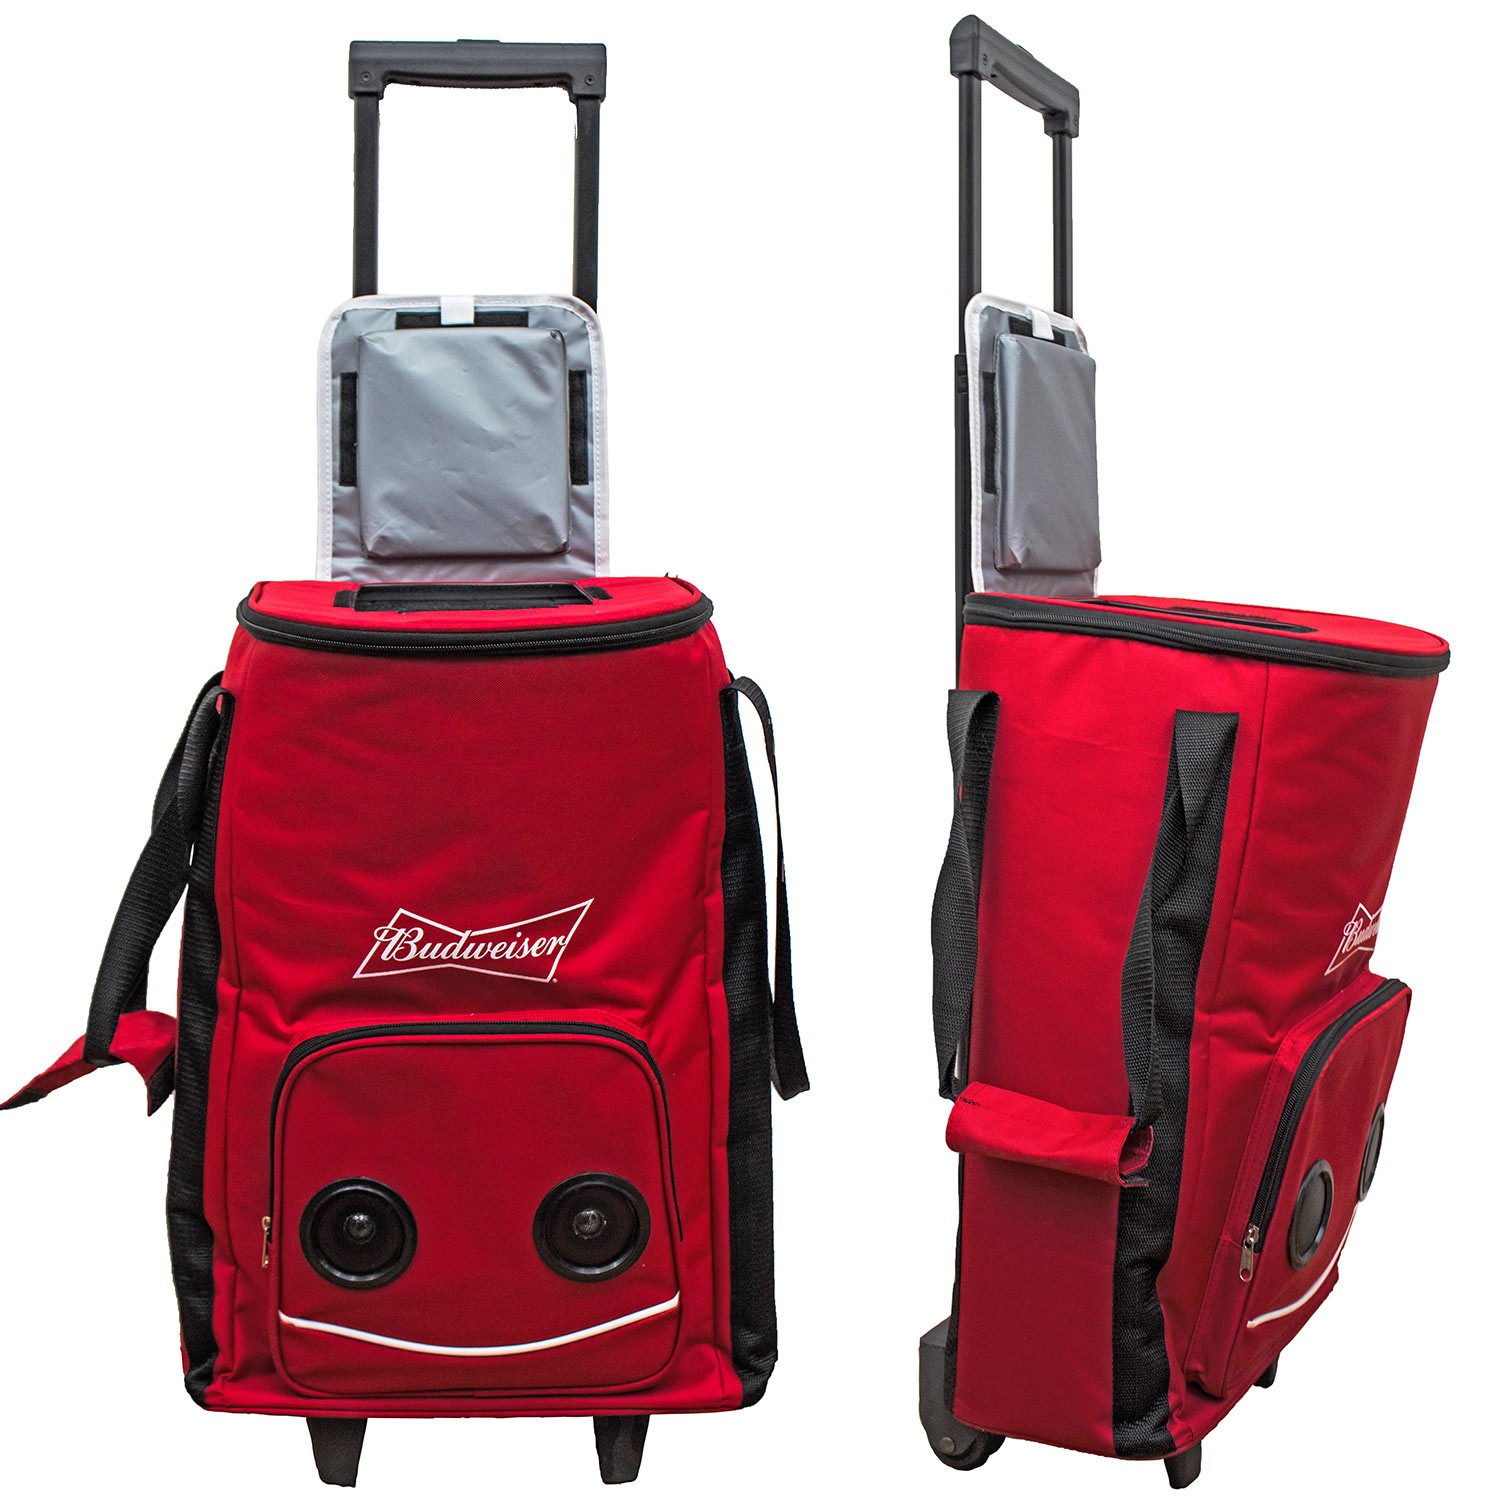 Budweiser Rolling Cooler Bag With Speakers